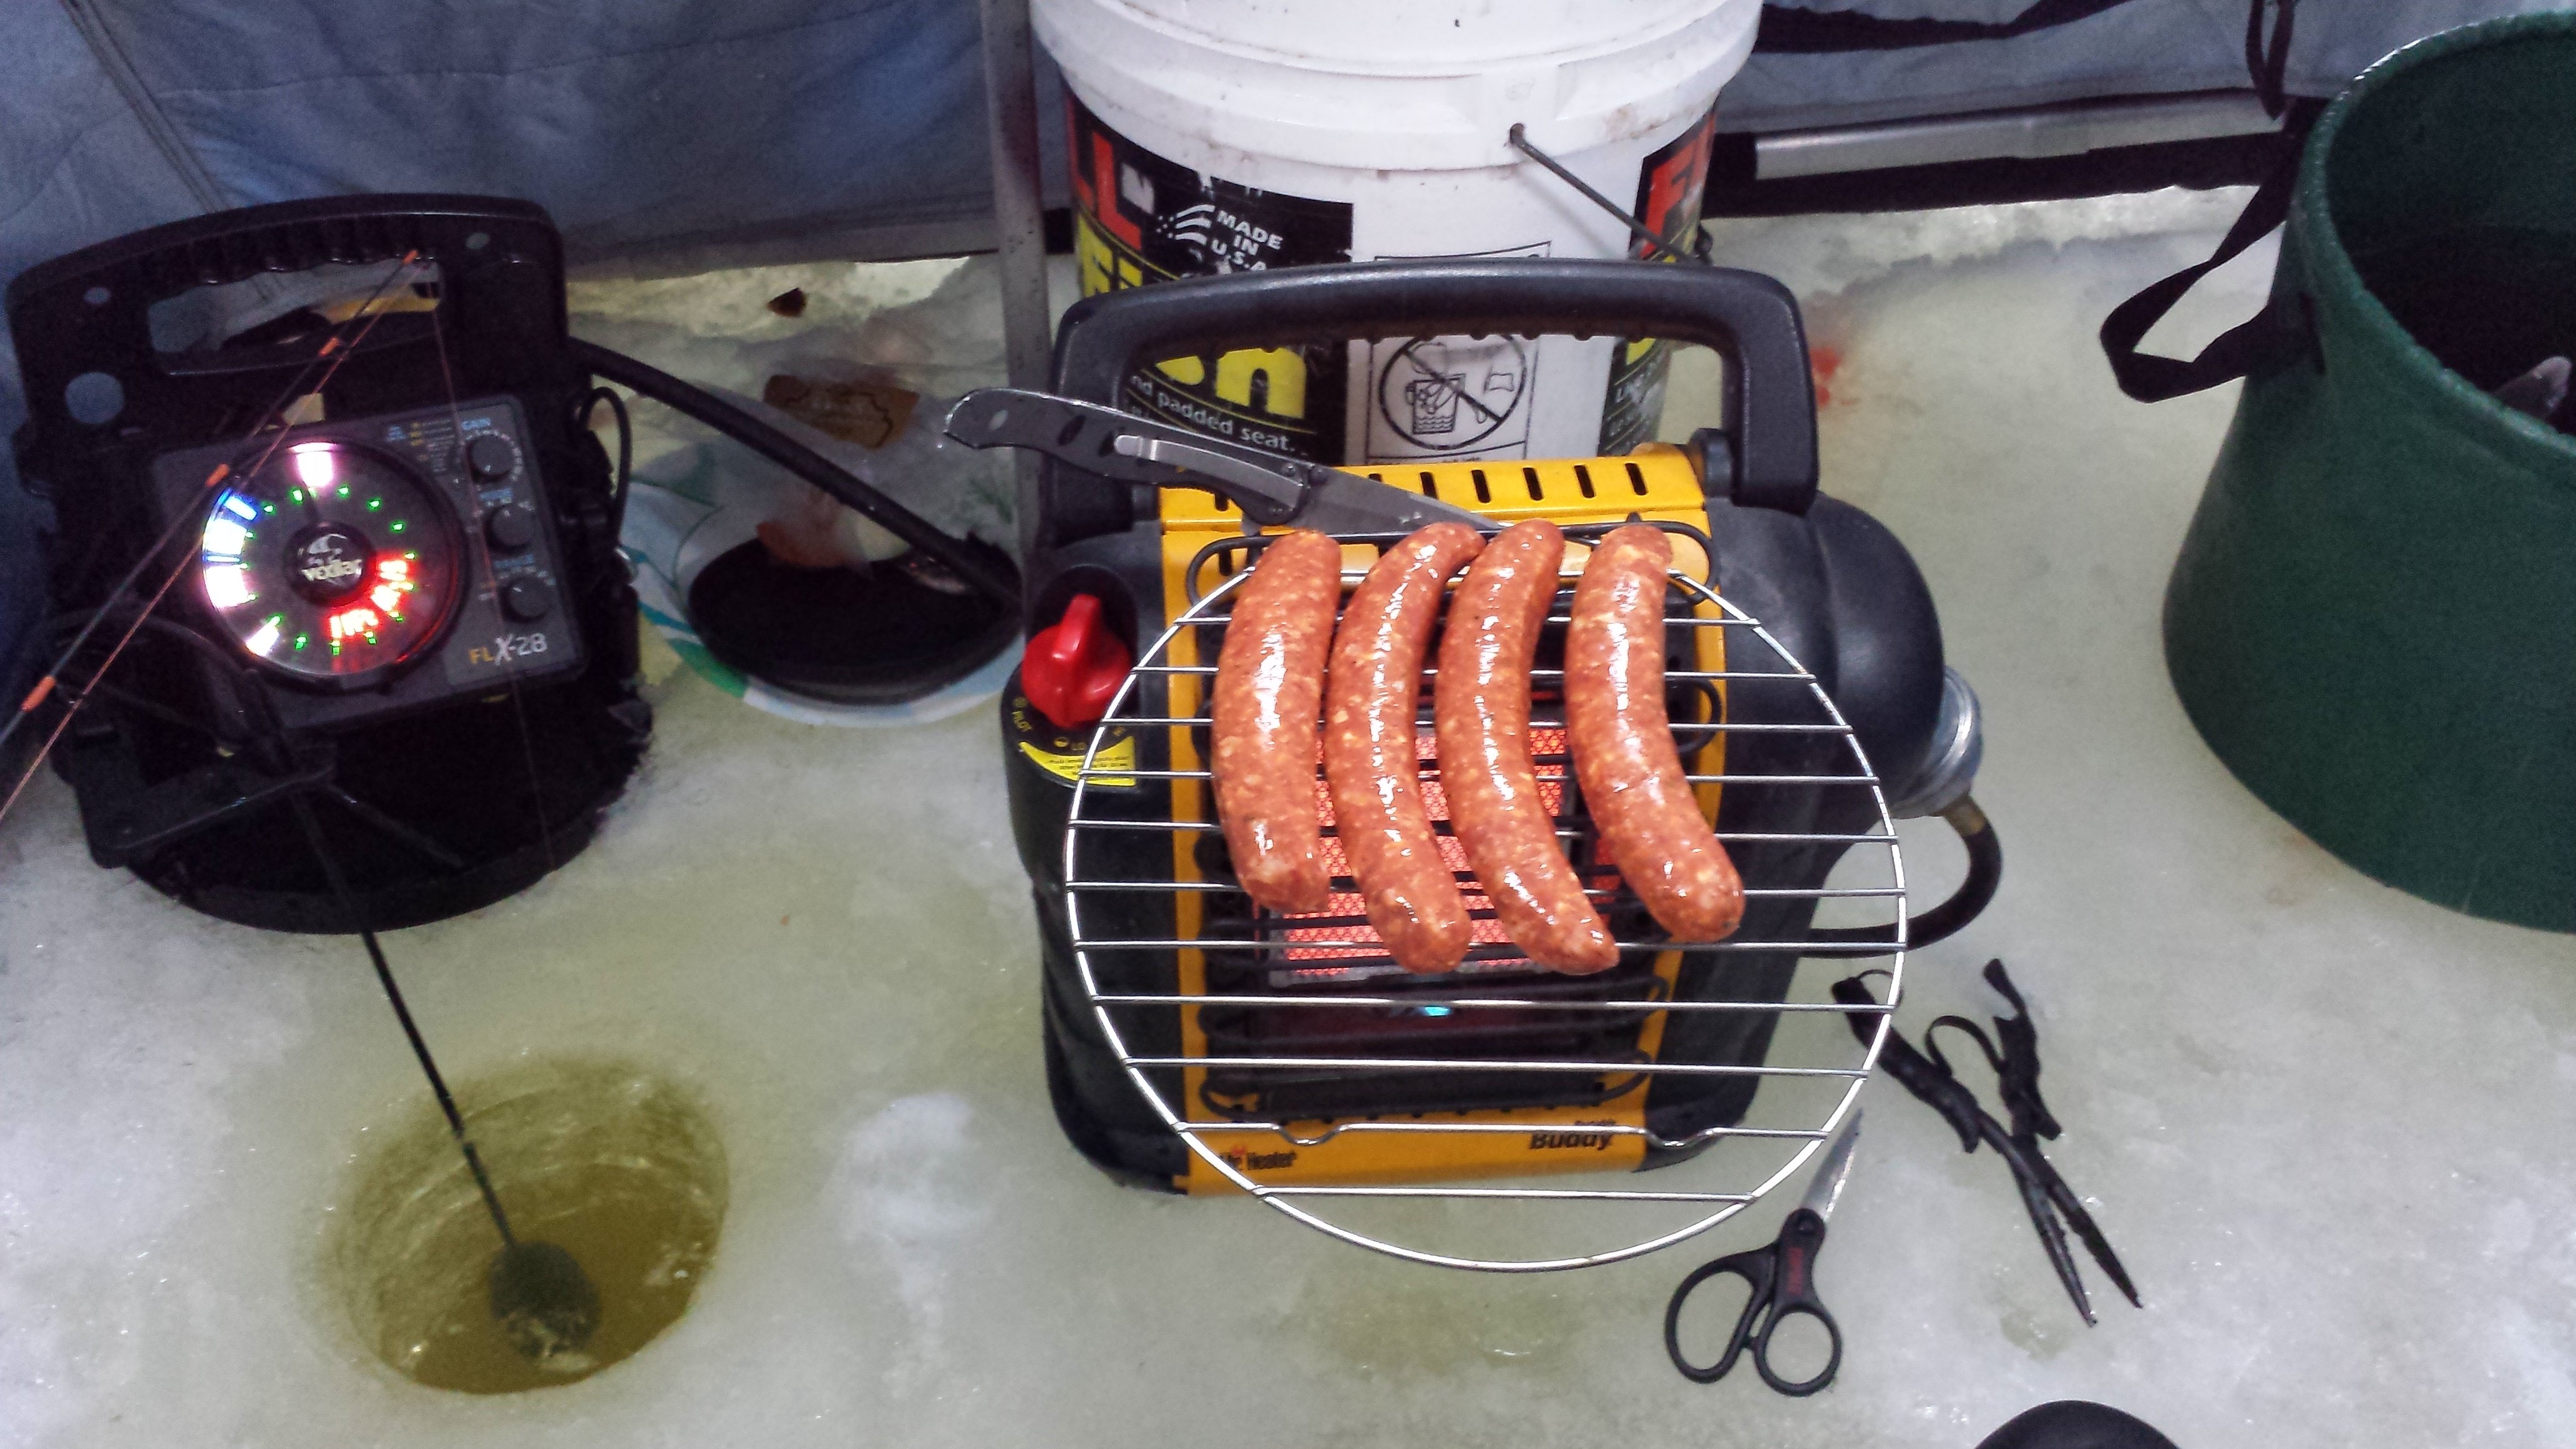 Buddy Heater Cooking Ice Fishing Forum InDepth Outdoors